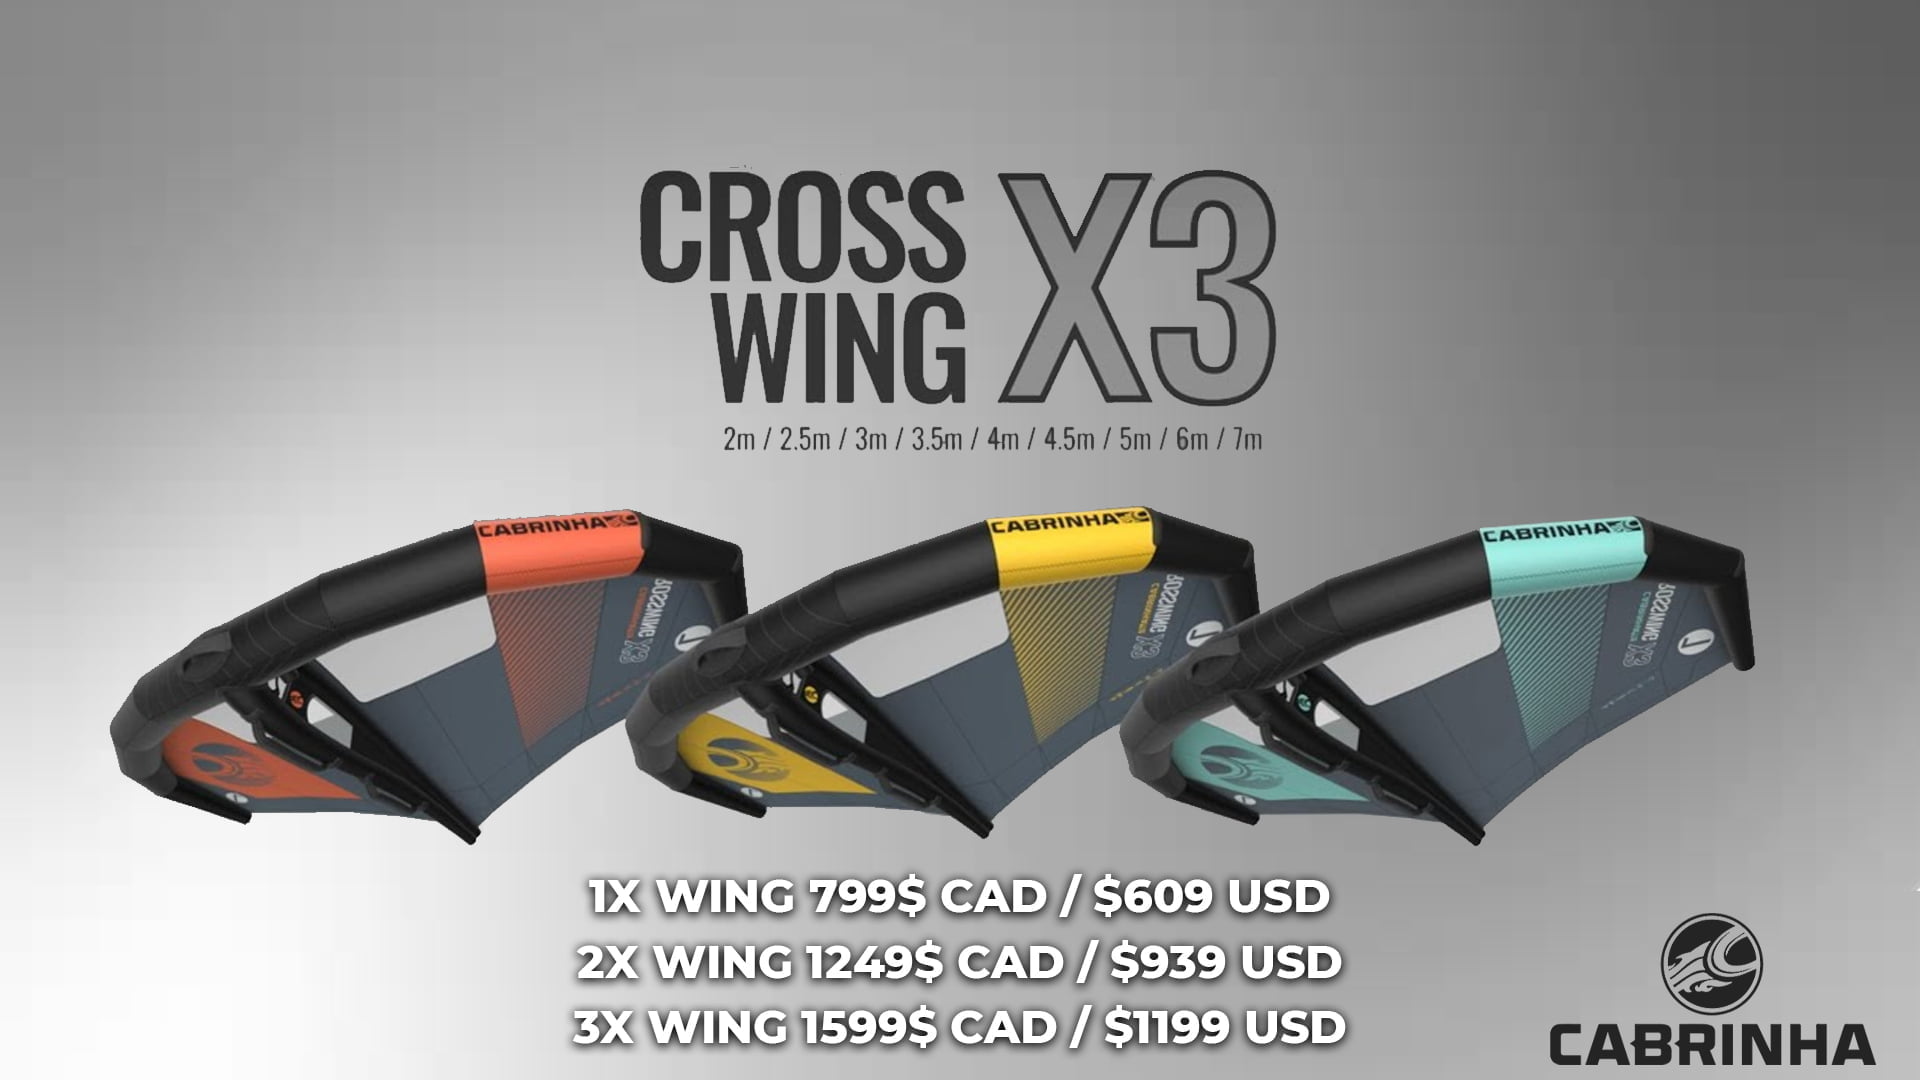 Promo-X3-wing-only-banner-1920x1080-1.0-1.jpg